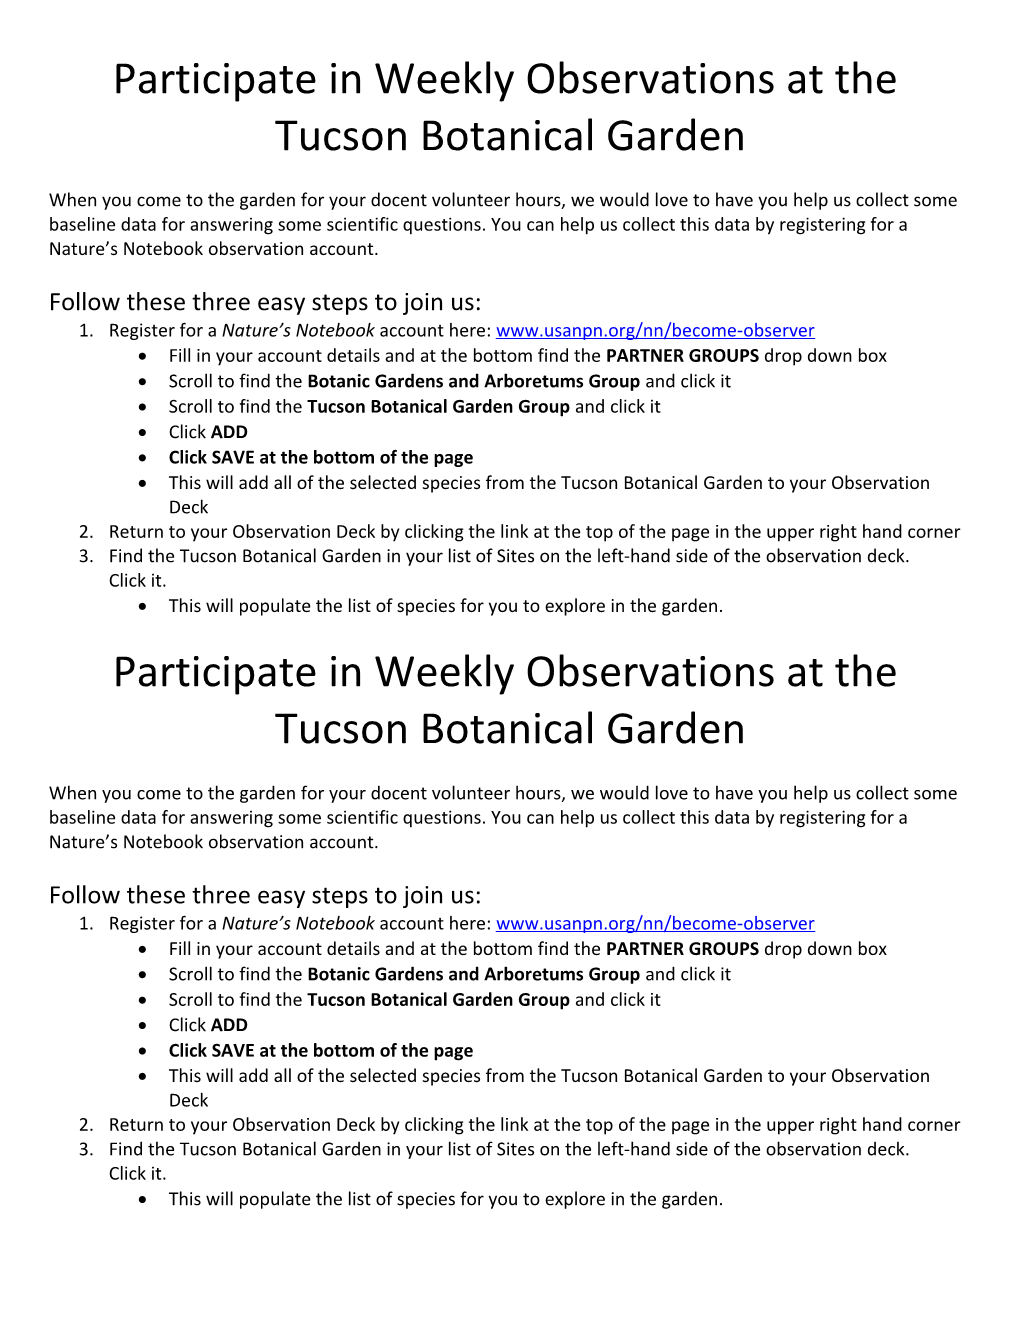 Participate in Weekly Observations at The